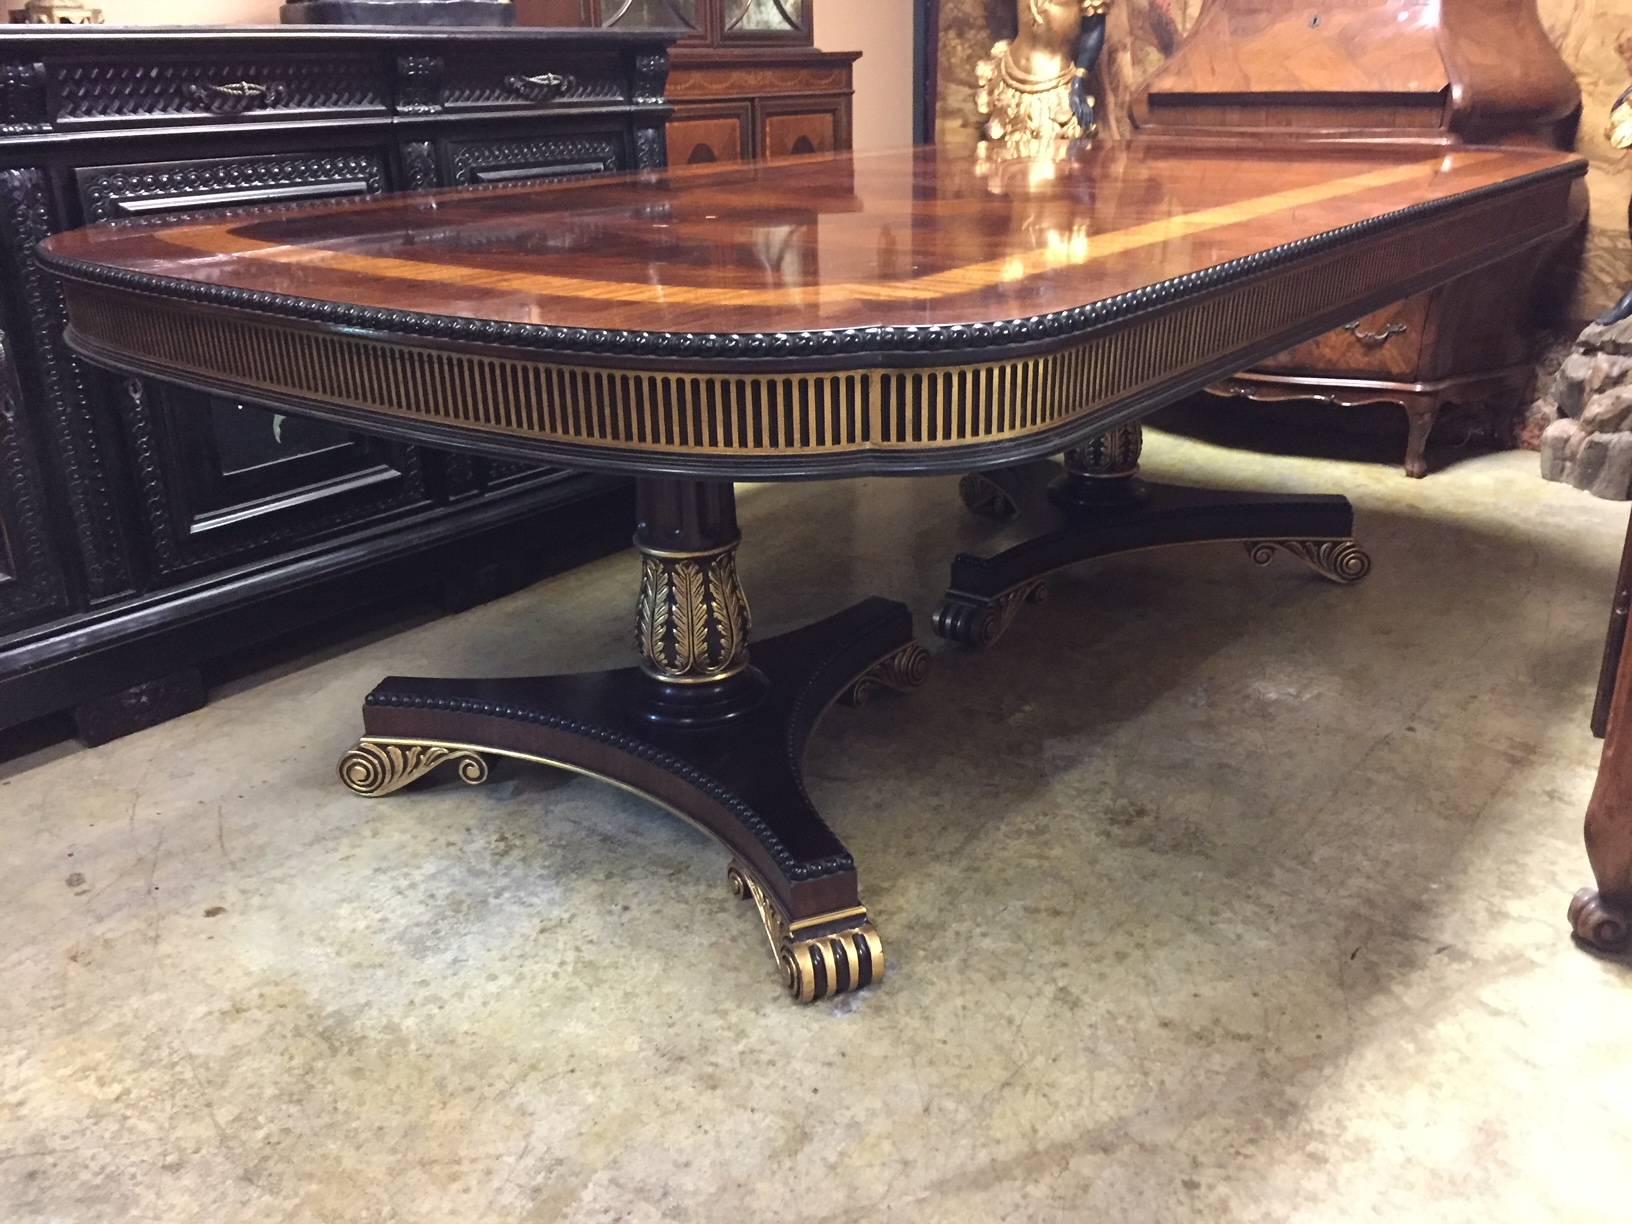 Spectacular regency style carved and partial gilt satinwood and kingwood inlaid mahogany two pedestal dining table with three leaves.
By E.J. Victor.
  

Dimensions:
Height 31 inches x depth 54 inches
Length closed is 89 inches
Length open is 158